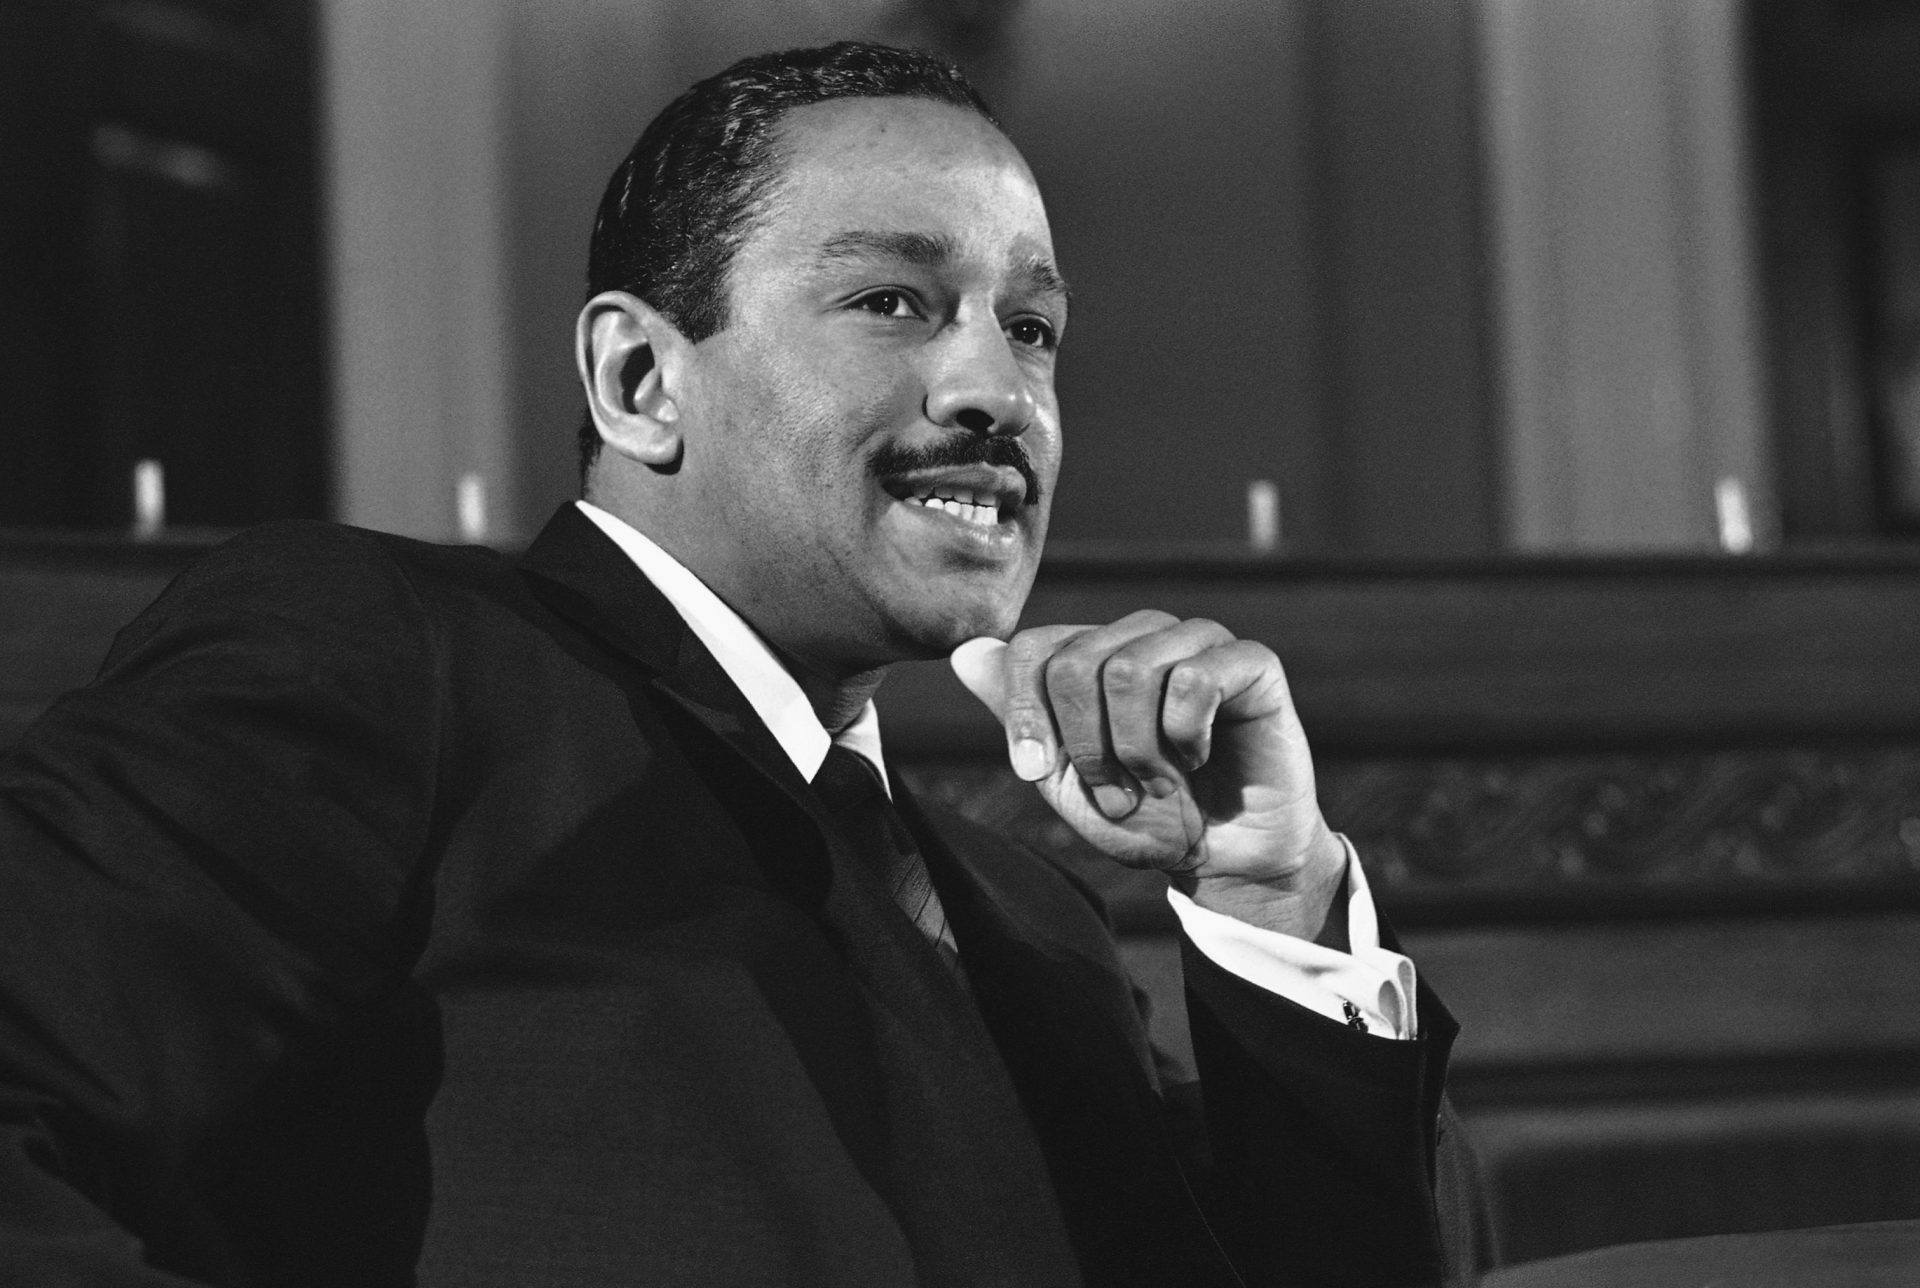 FILE PHOTO: Rep. John Conyers, Jr., D-Mich. the only African American member of the select House Committee which investigated Adam Clayton Powell, meets with newsmen on Capitol Hill in Washington on Feb. 28, 1967. He said he will try on March 1 to soften the censure resolution aimed at Powell. The committee approved a resolution to seat Powell with a stiff censure and a $40,000 fine.